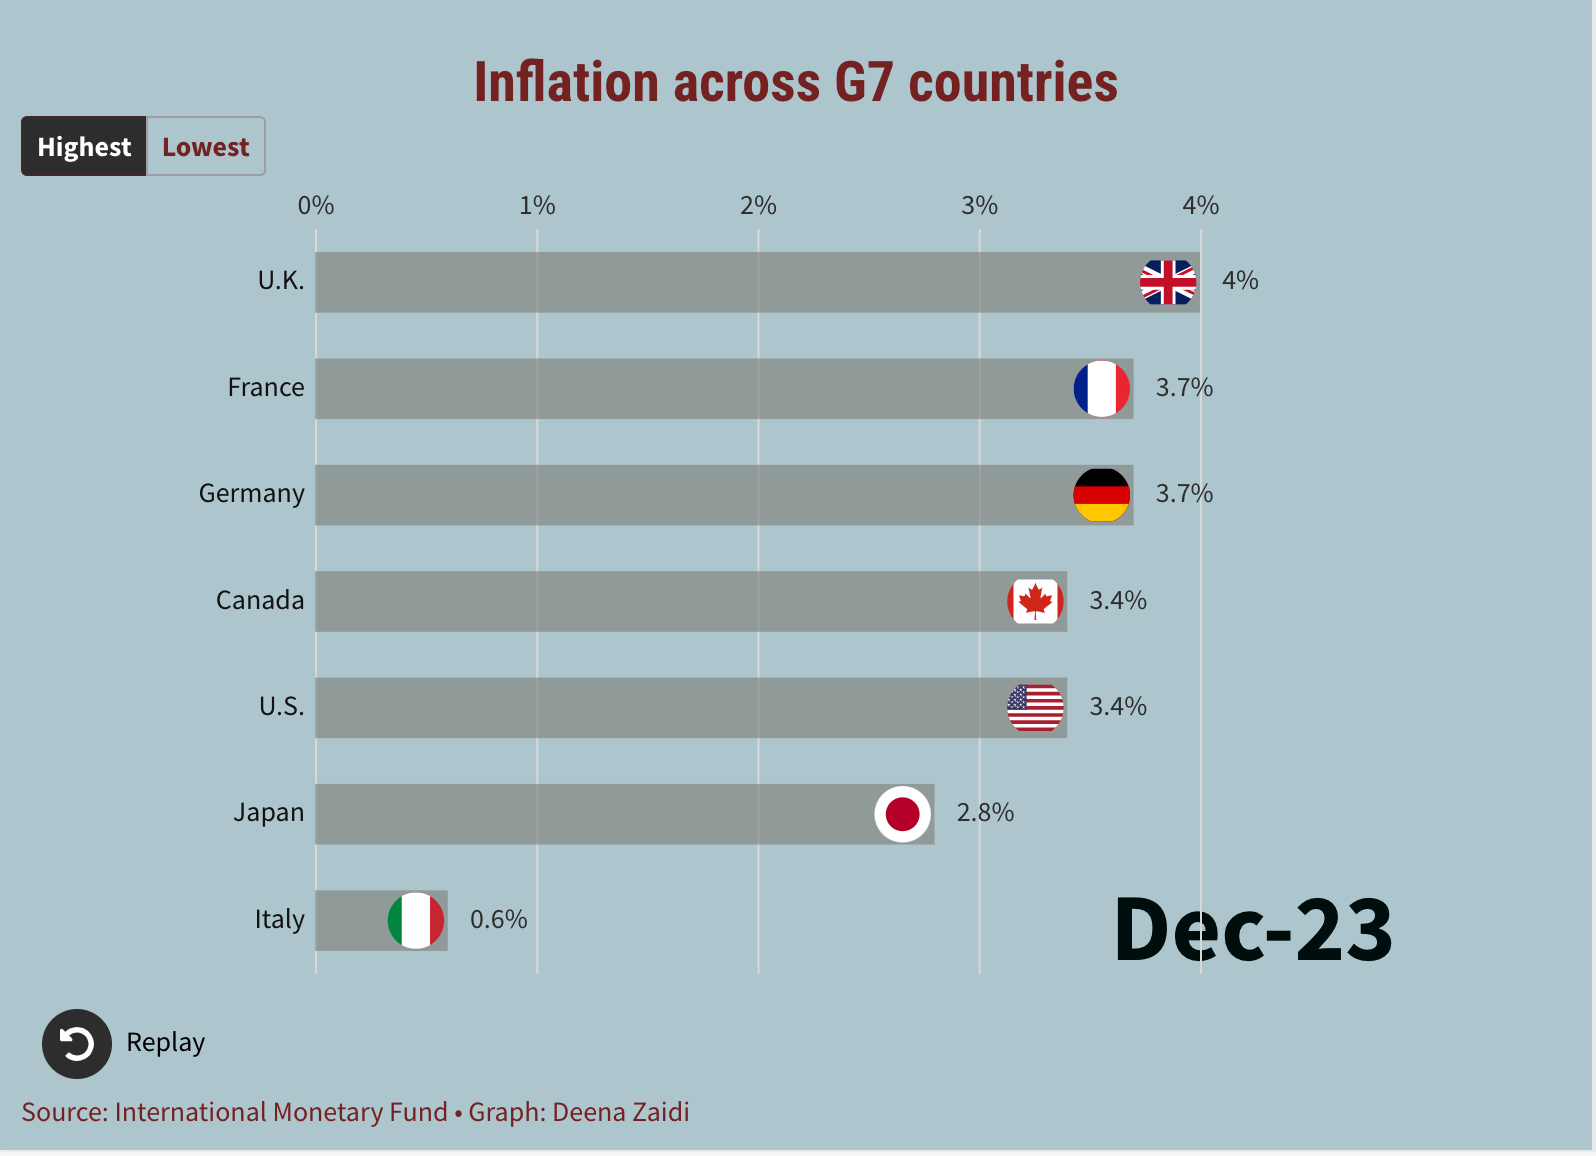 U.K. has the highest inflation rate across G-7 Countries